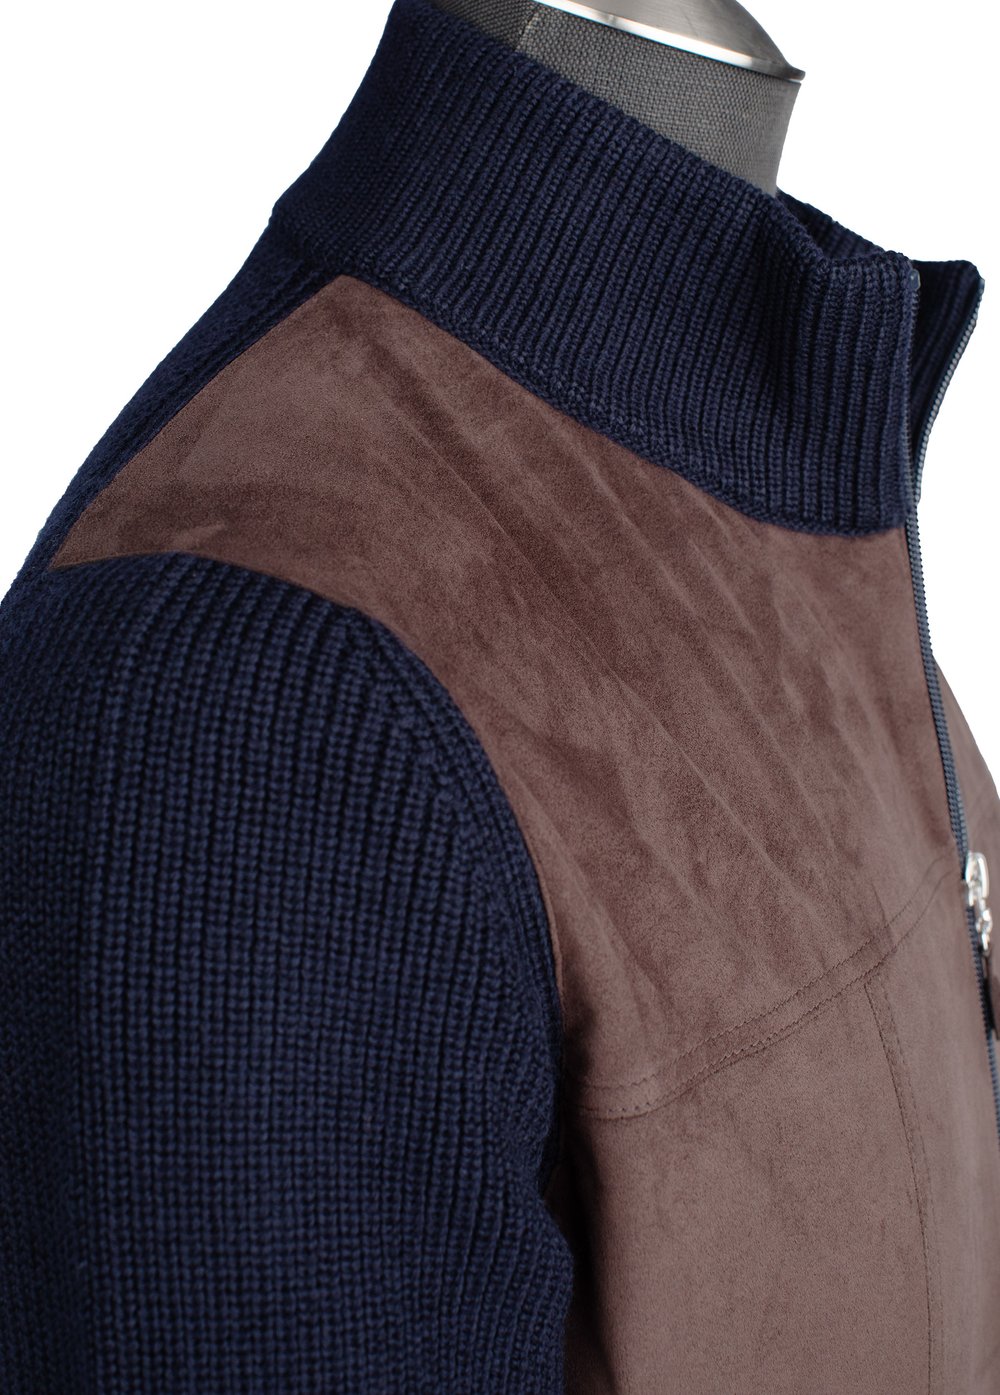 Gran Sasso Wool and Alcantara Full-Zip Sweater in Navy and Taupe